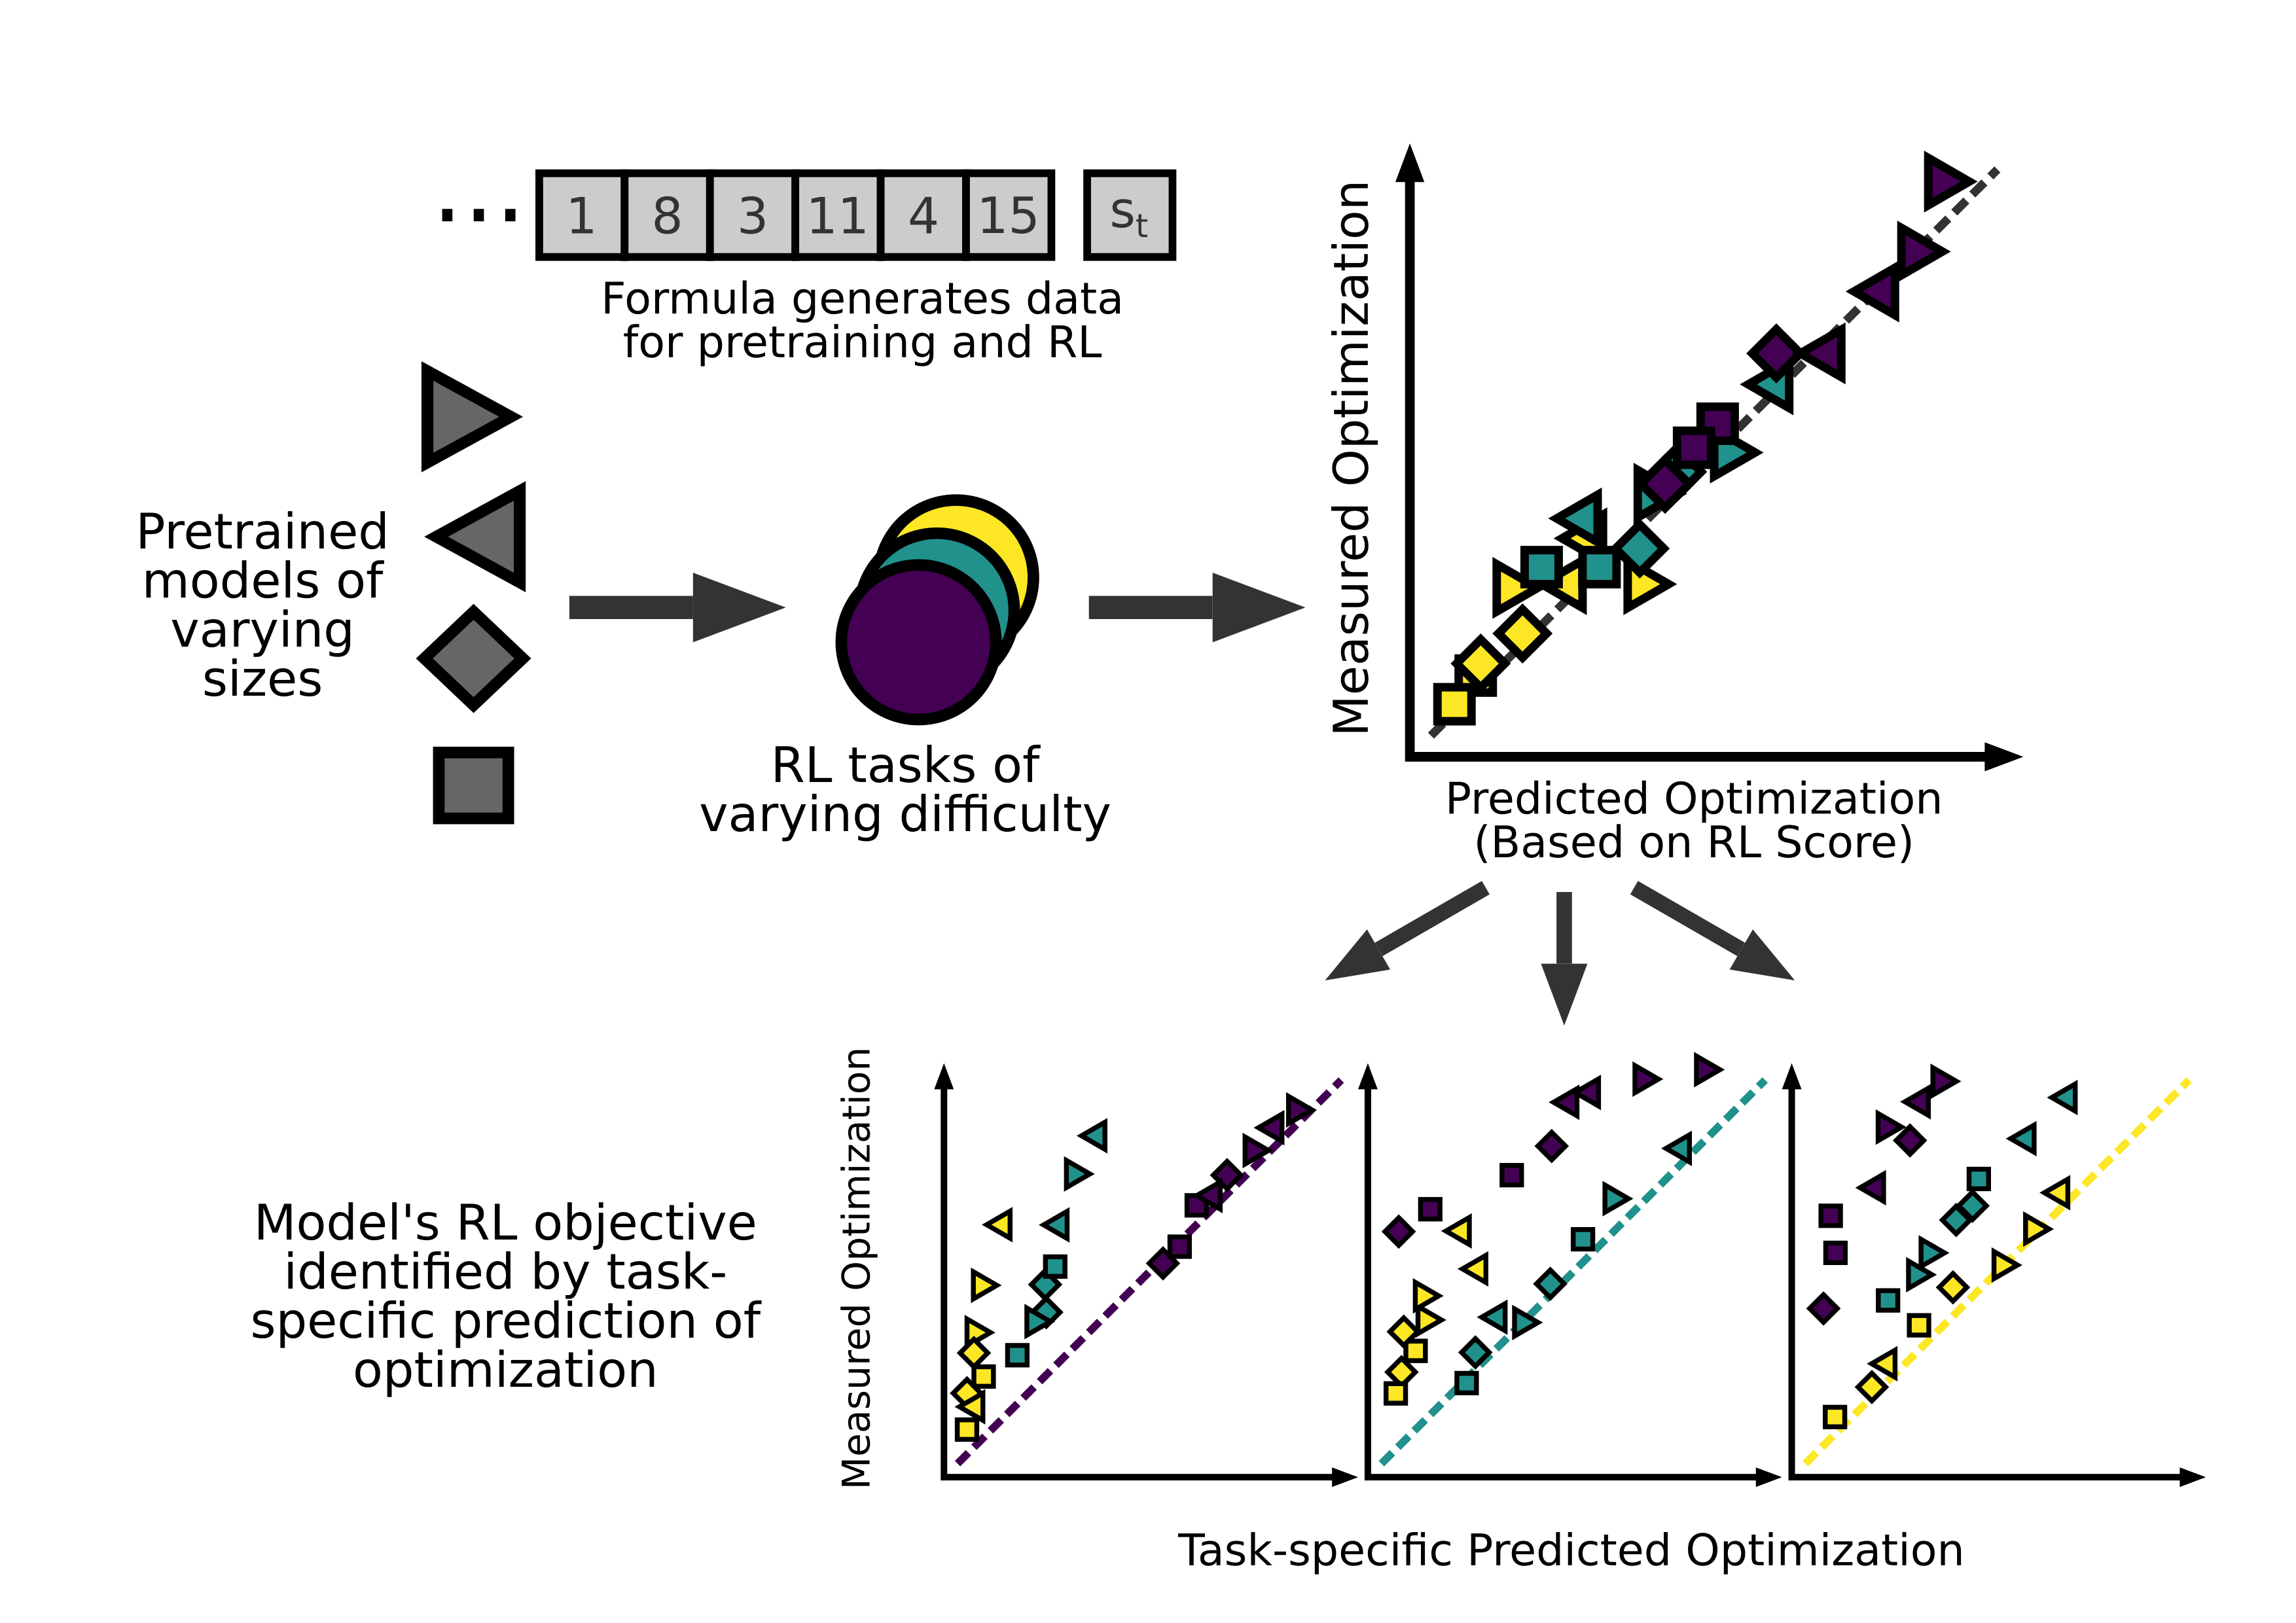 A graphical abstract: A formula generates data which is used to pretrain models. These are then subject to three RL tasks of varying difficulty. The reward function of a model can be identified by looking at a task-specific prediction of optimization as comapared to measured optimization. 